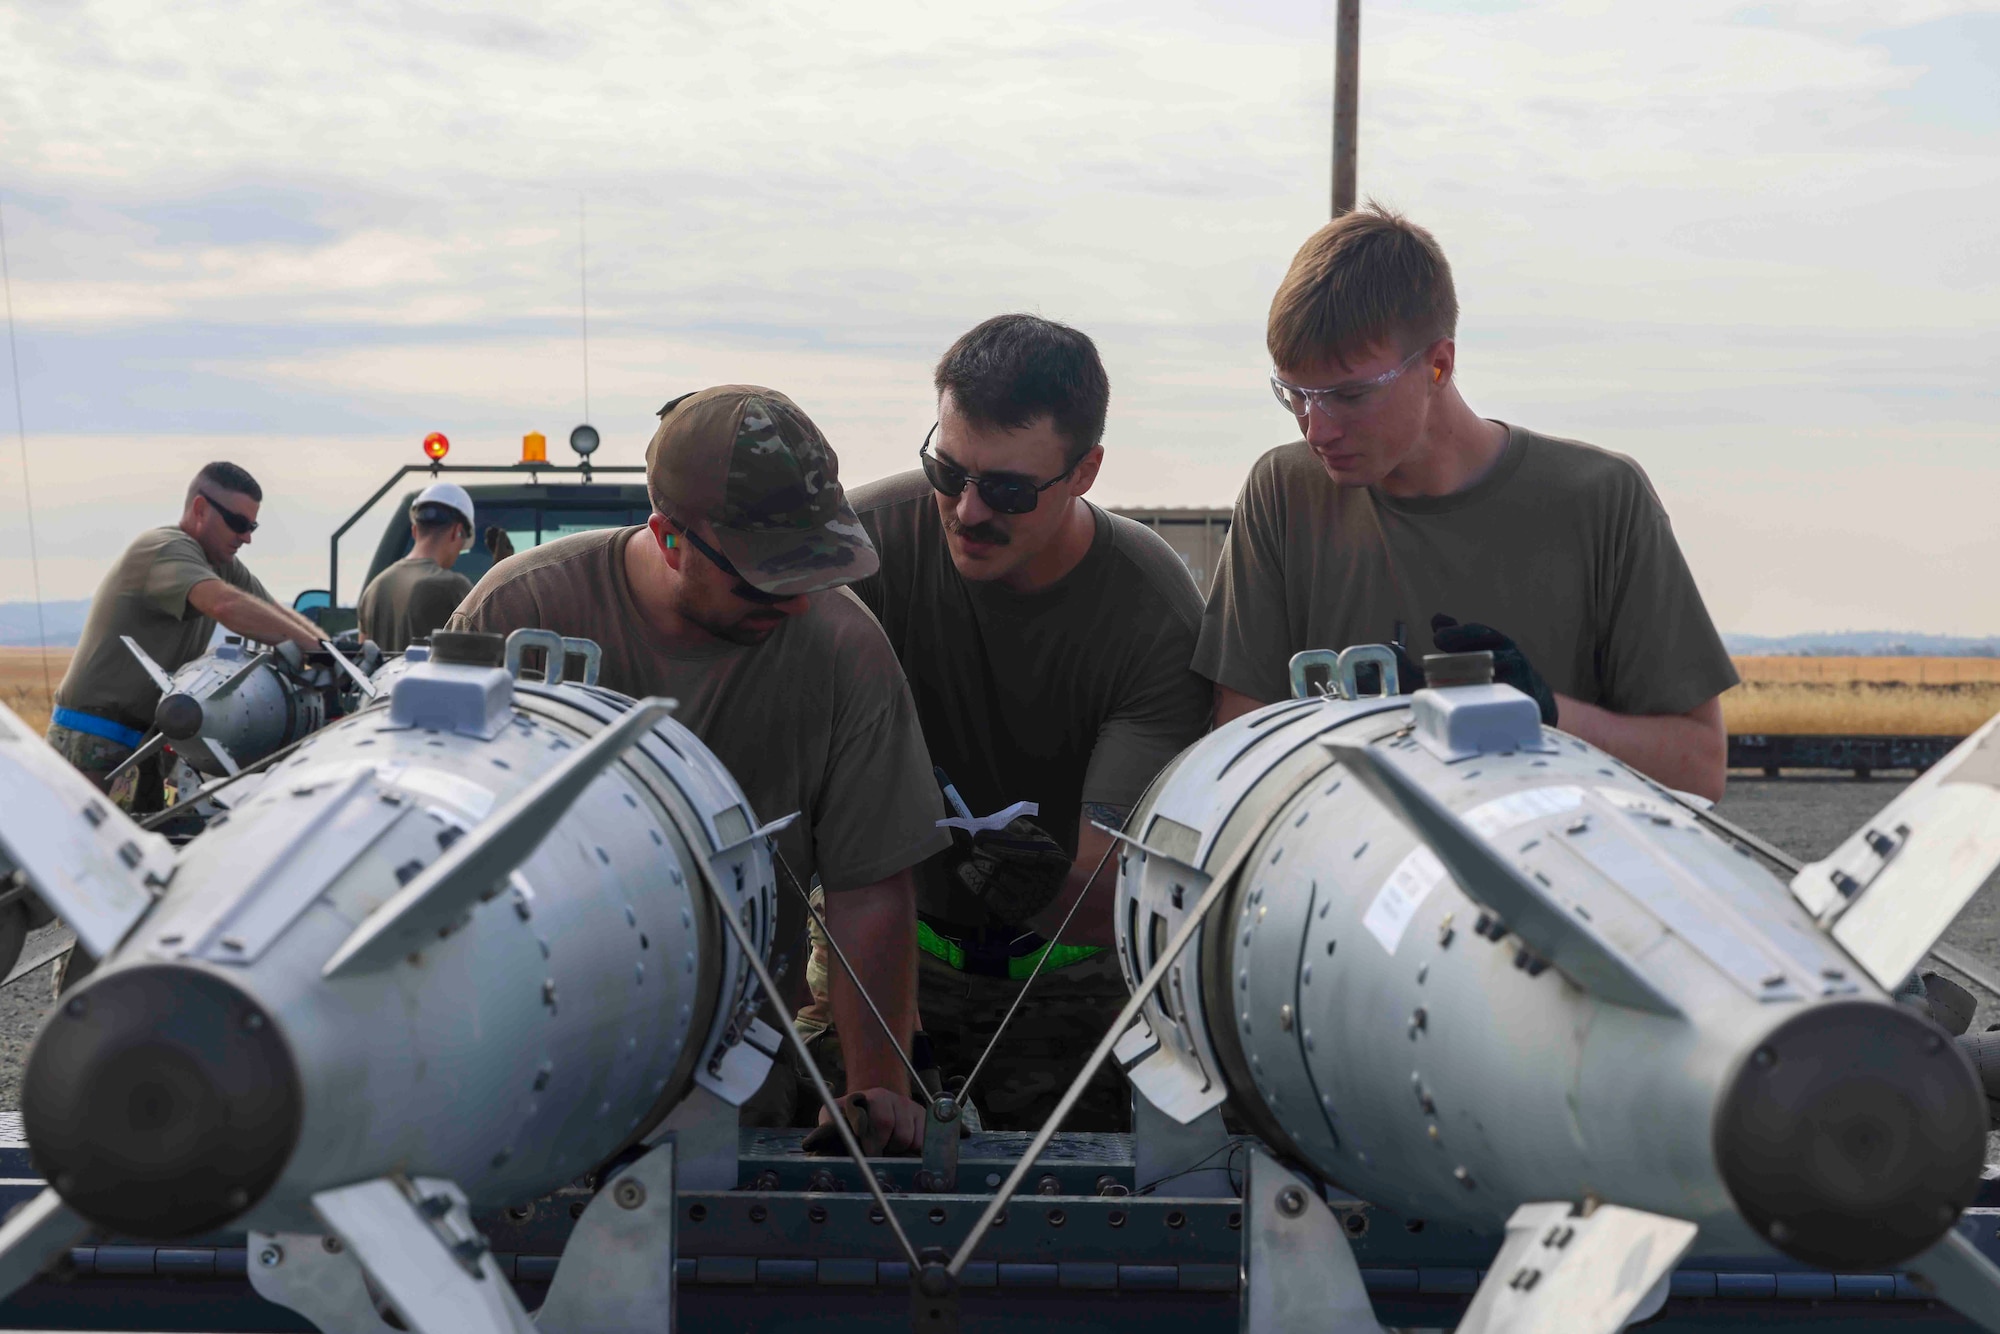 U.S. Air Force Airmen from Whiteman Air Force Base, Missouri, 509th Munitions Squadron, conduct a trailer build of GBU-32 munitions while competing in the Air Force Combat Operations Competition, Aug. 22, 2023, at Beale AFB, California.